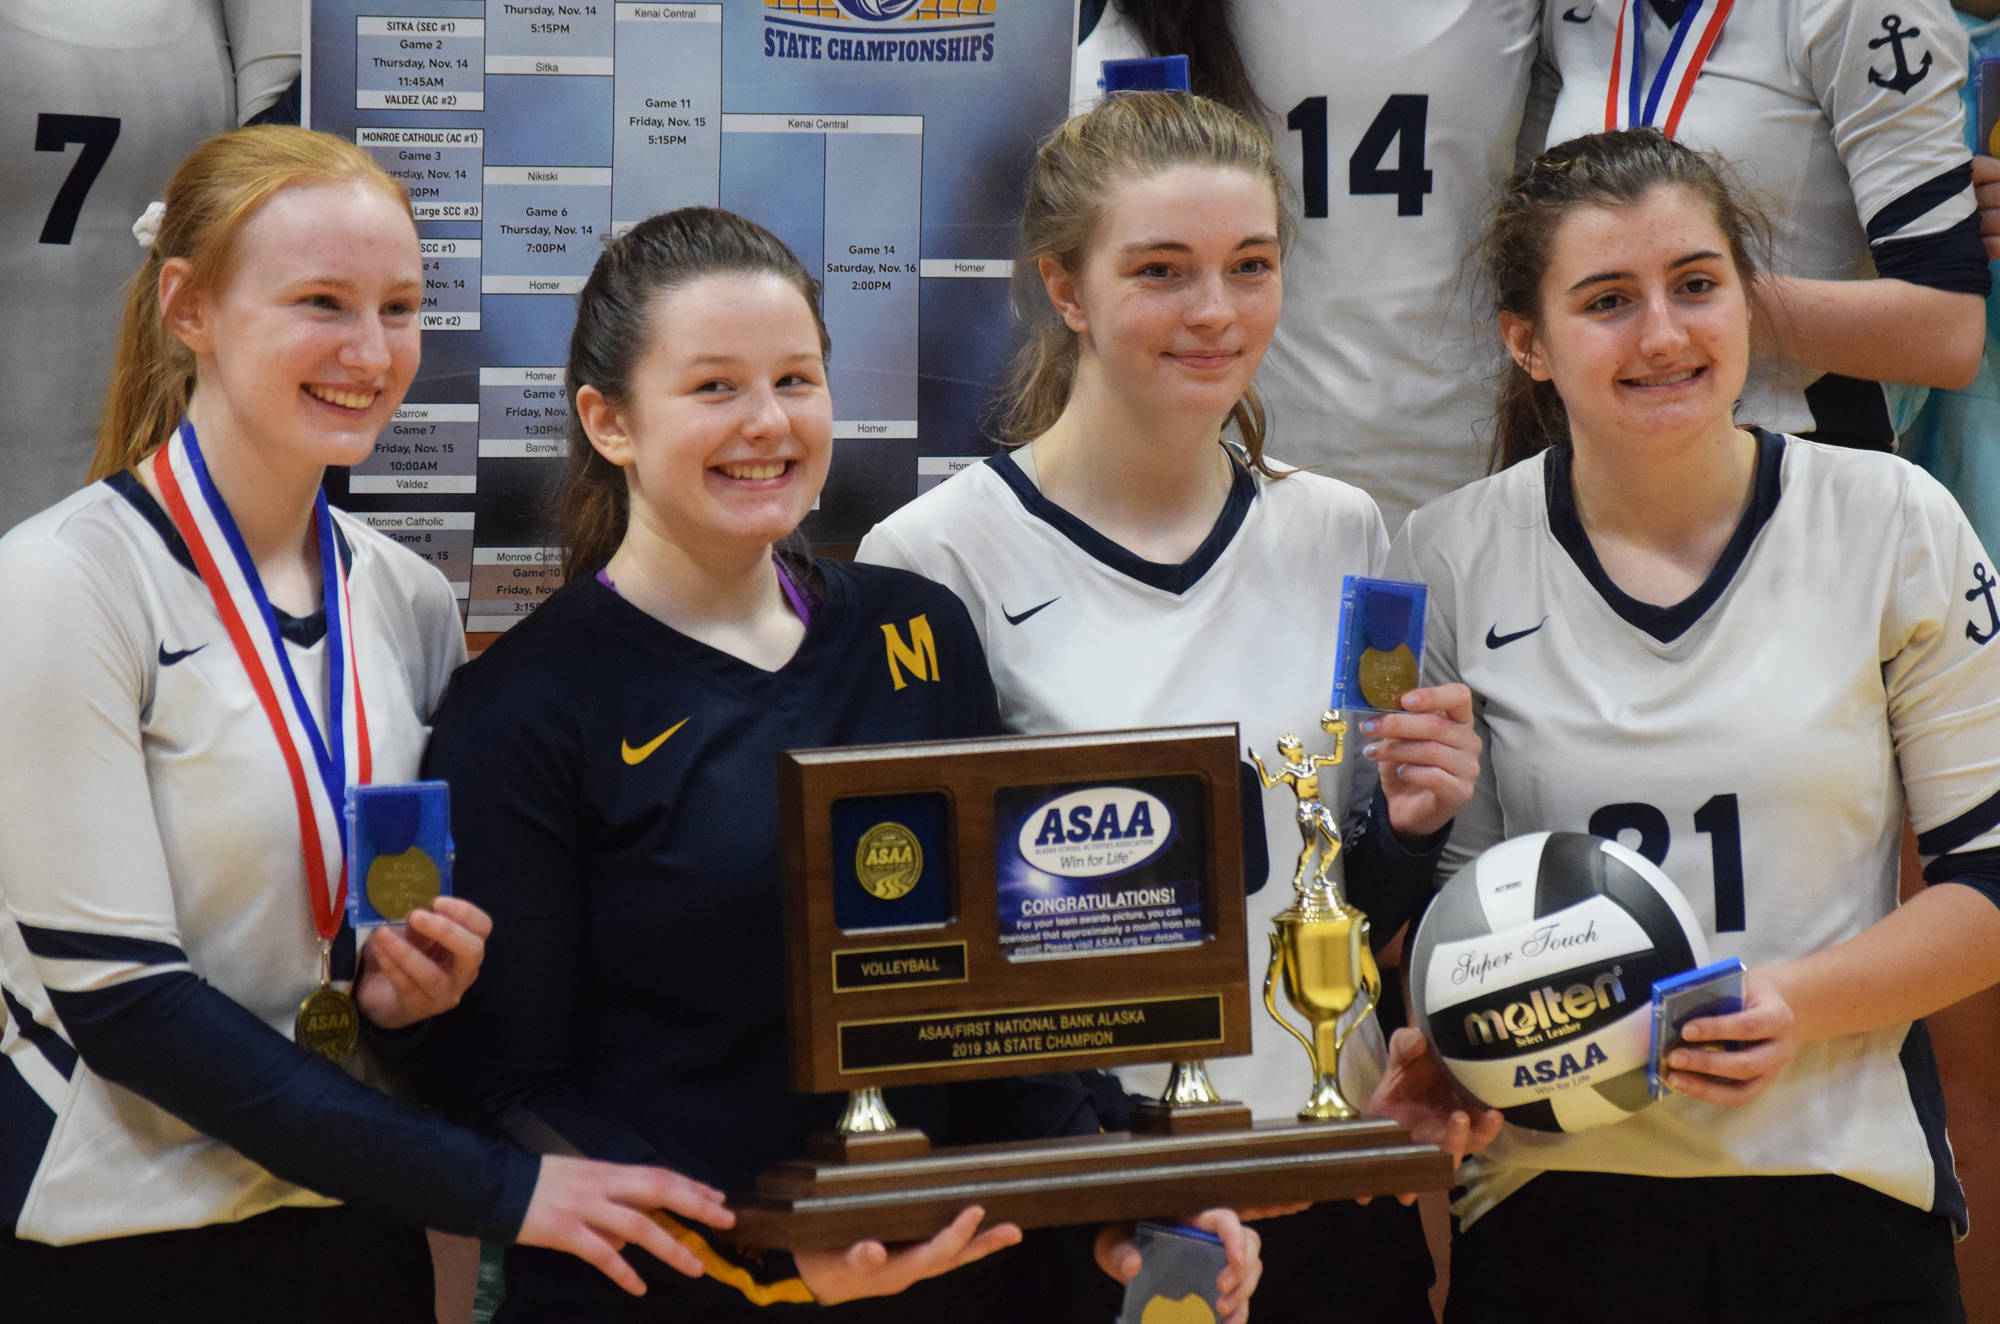 Members of the Homer volleyball team hold up the Class 3A state championship trophy Saturday at the Class 3A state volleyball tournament at the Alaska Airlines Center in Anchorage. (Photo by Joey Klecka/Peninsula Clarion)